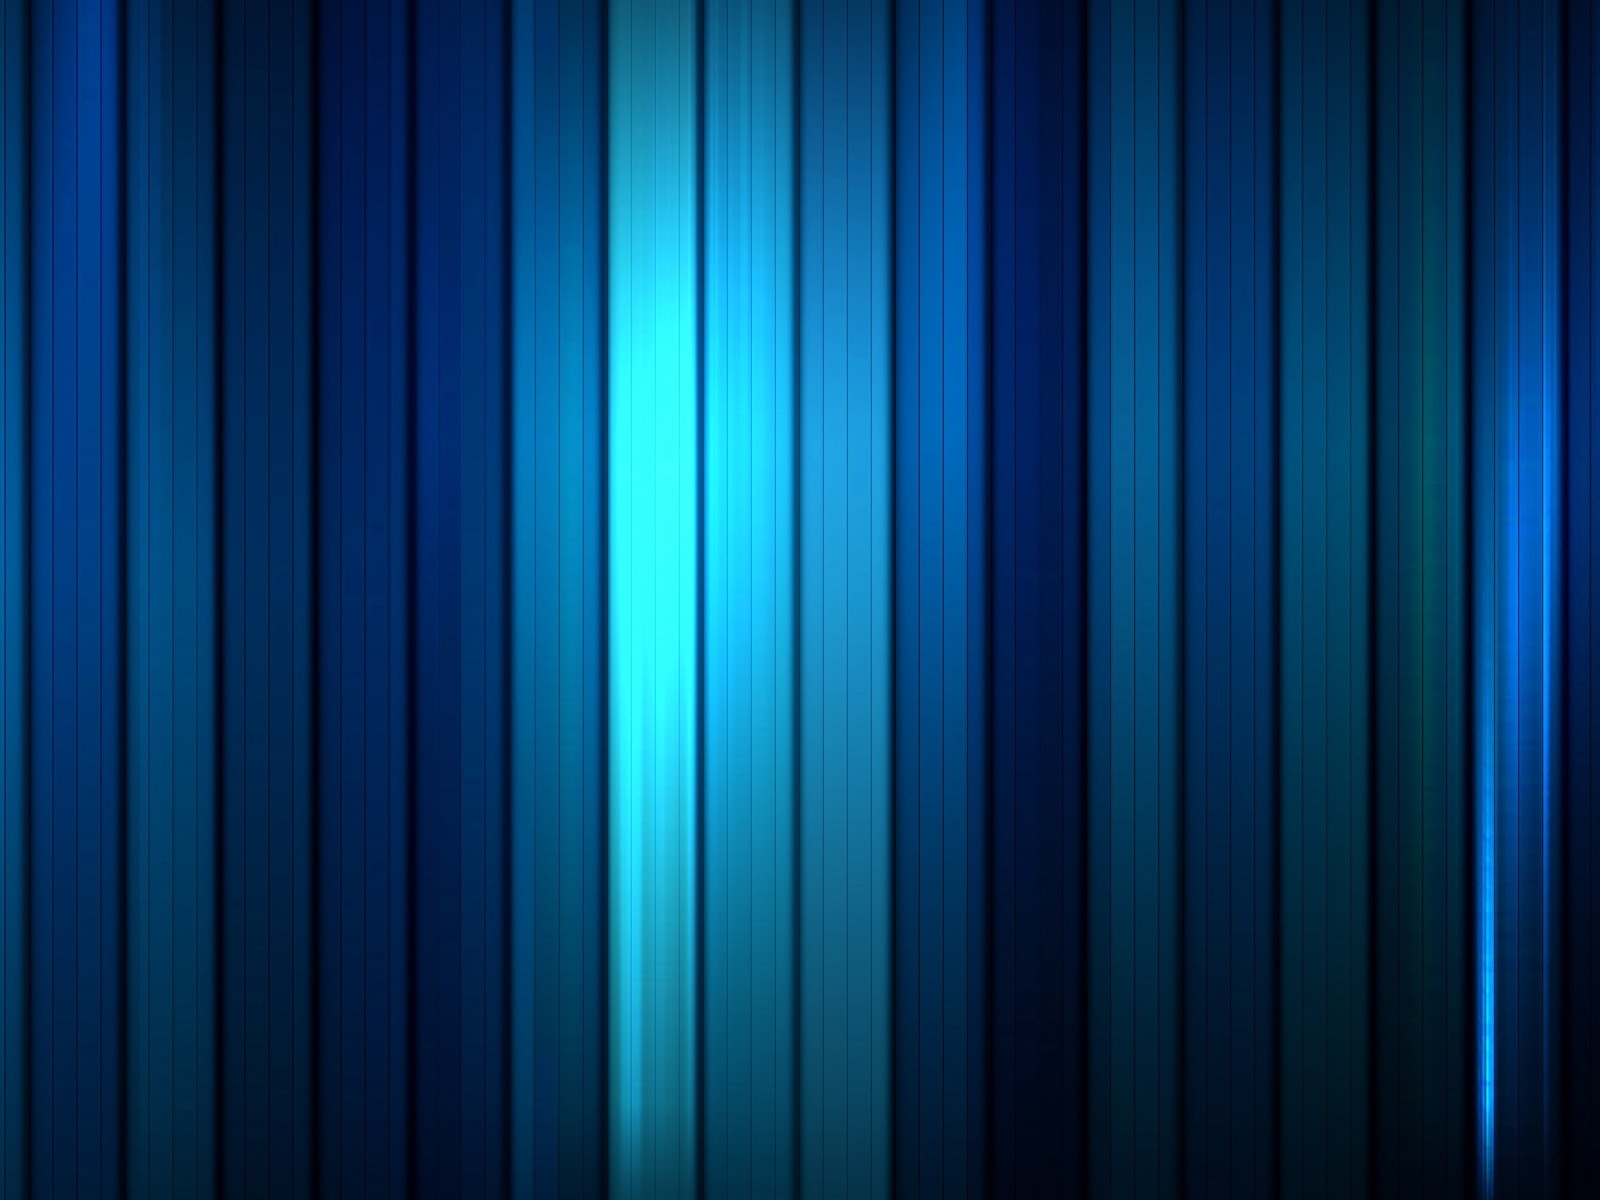 Motion Stripes for 1600 x 1200 resolution